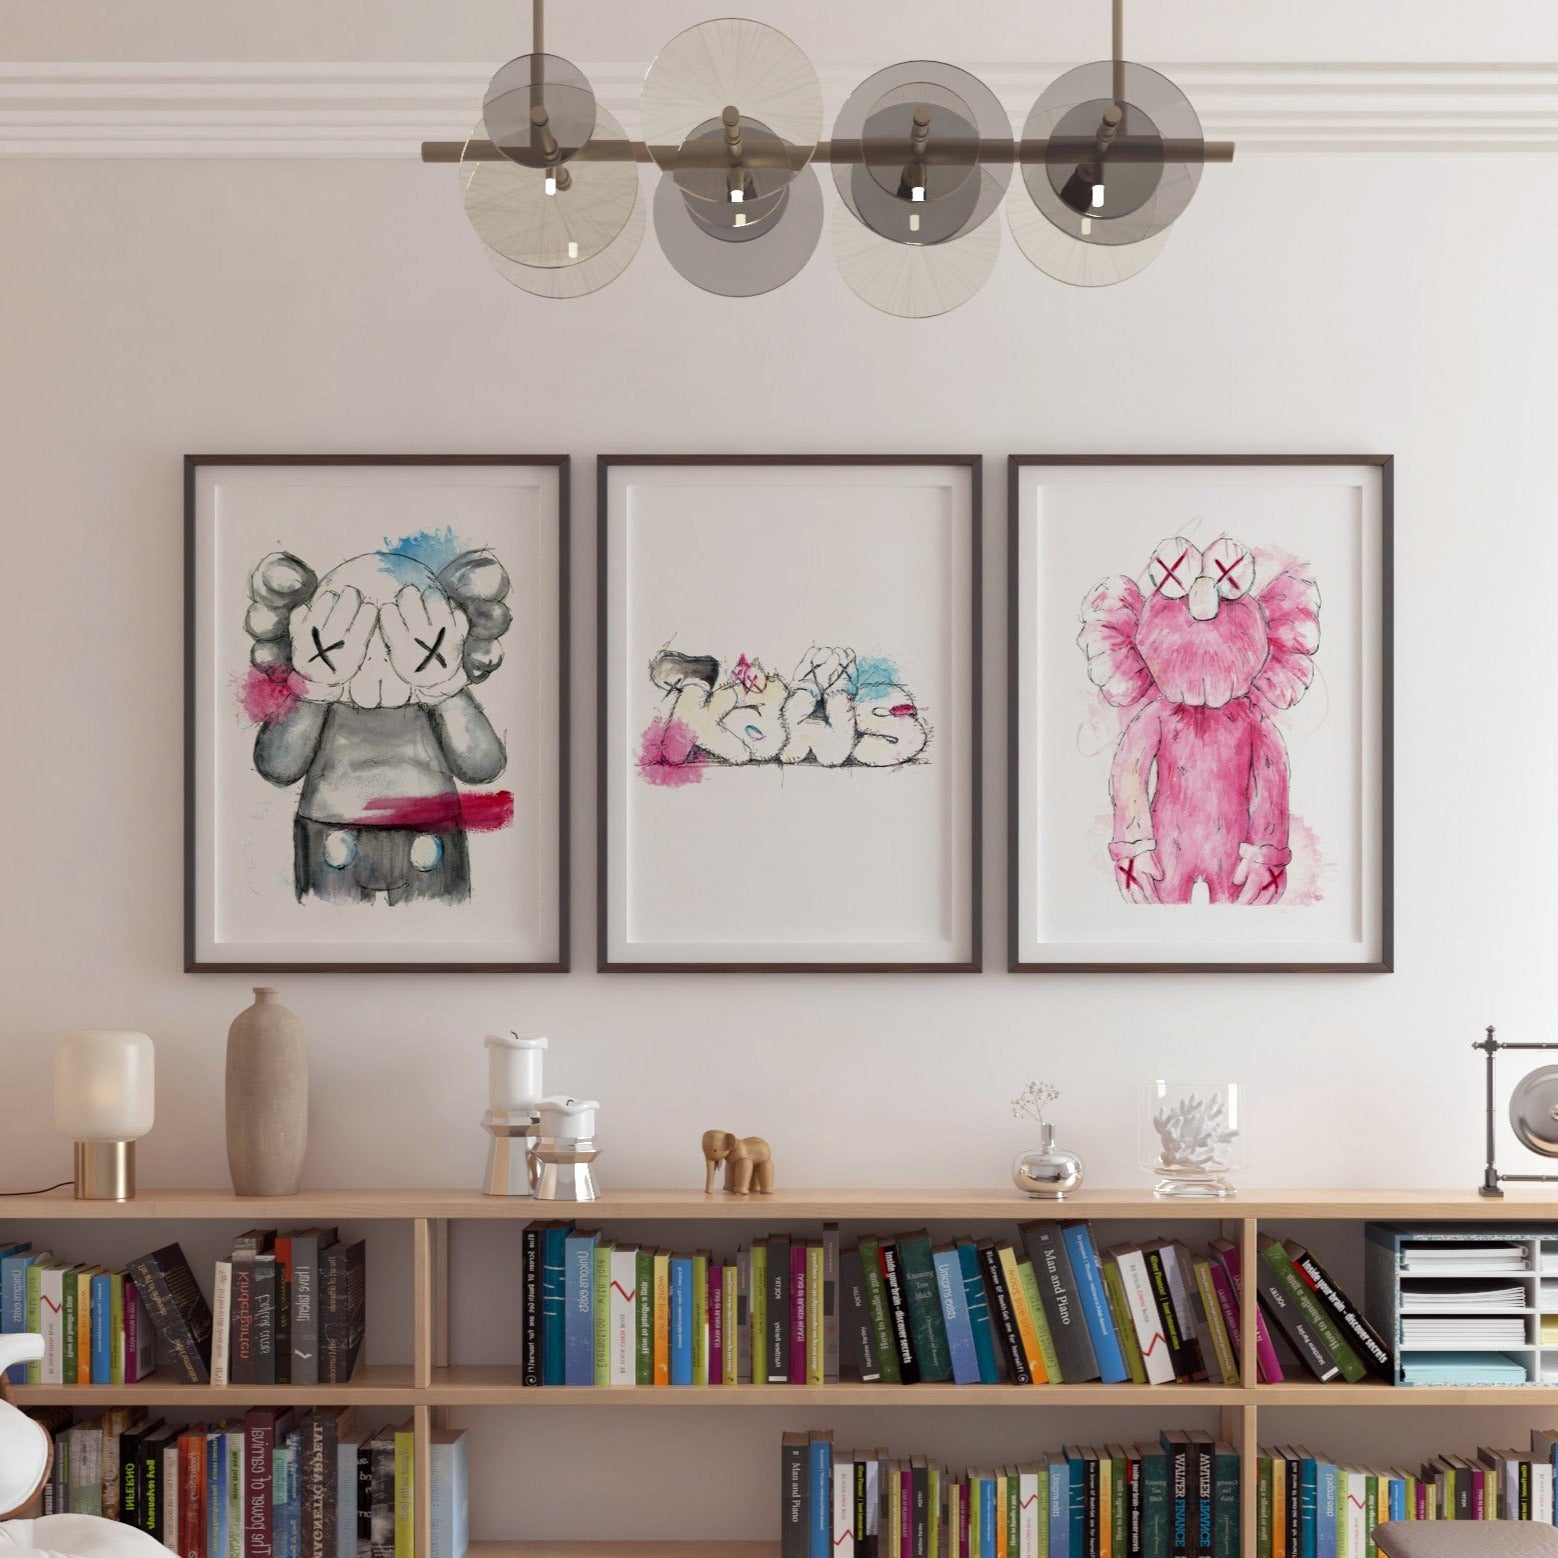 Kaws Poster High Quality Print Wall Art Gifts for Him/her Home